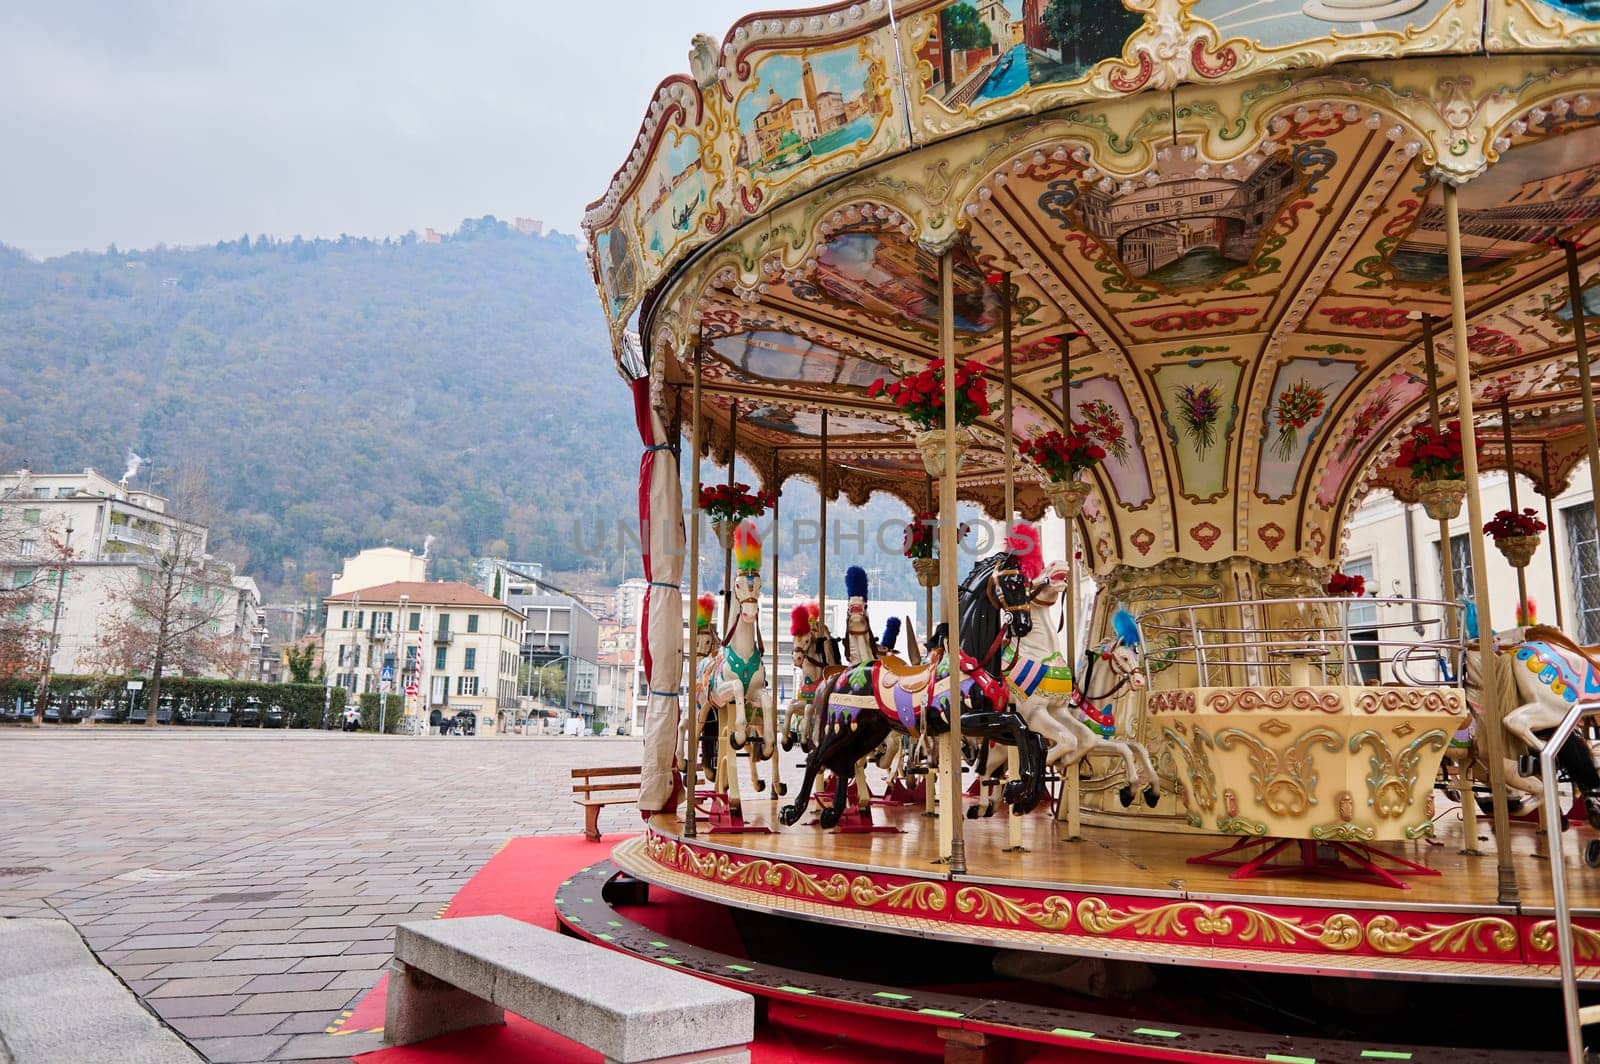 A merry go round, Victorian carousel in the Christmas fairground in Como, Italy against Italian Alps background on cloudy winter day